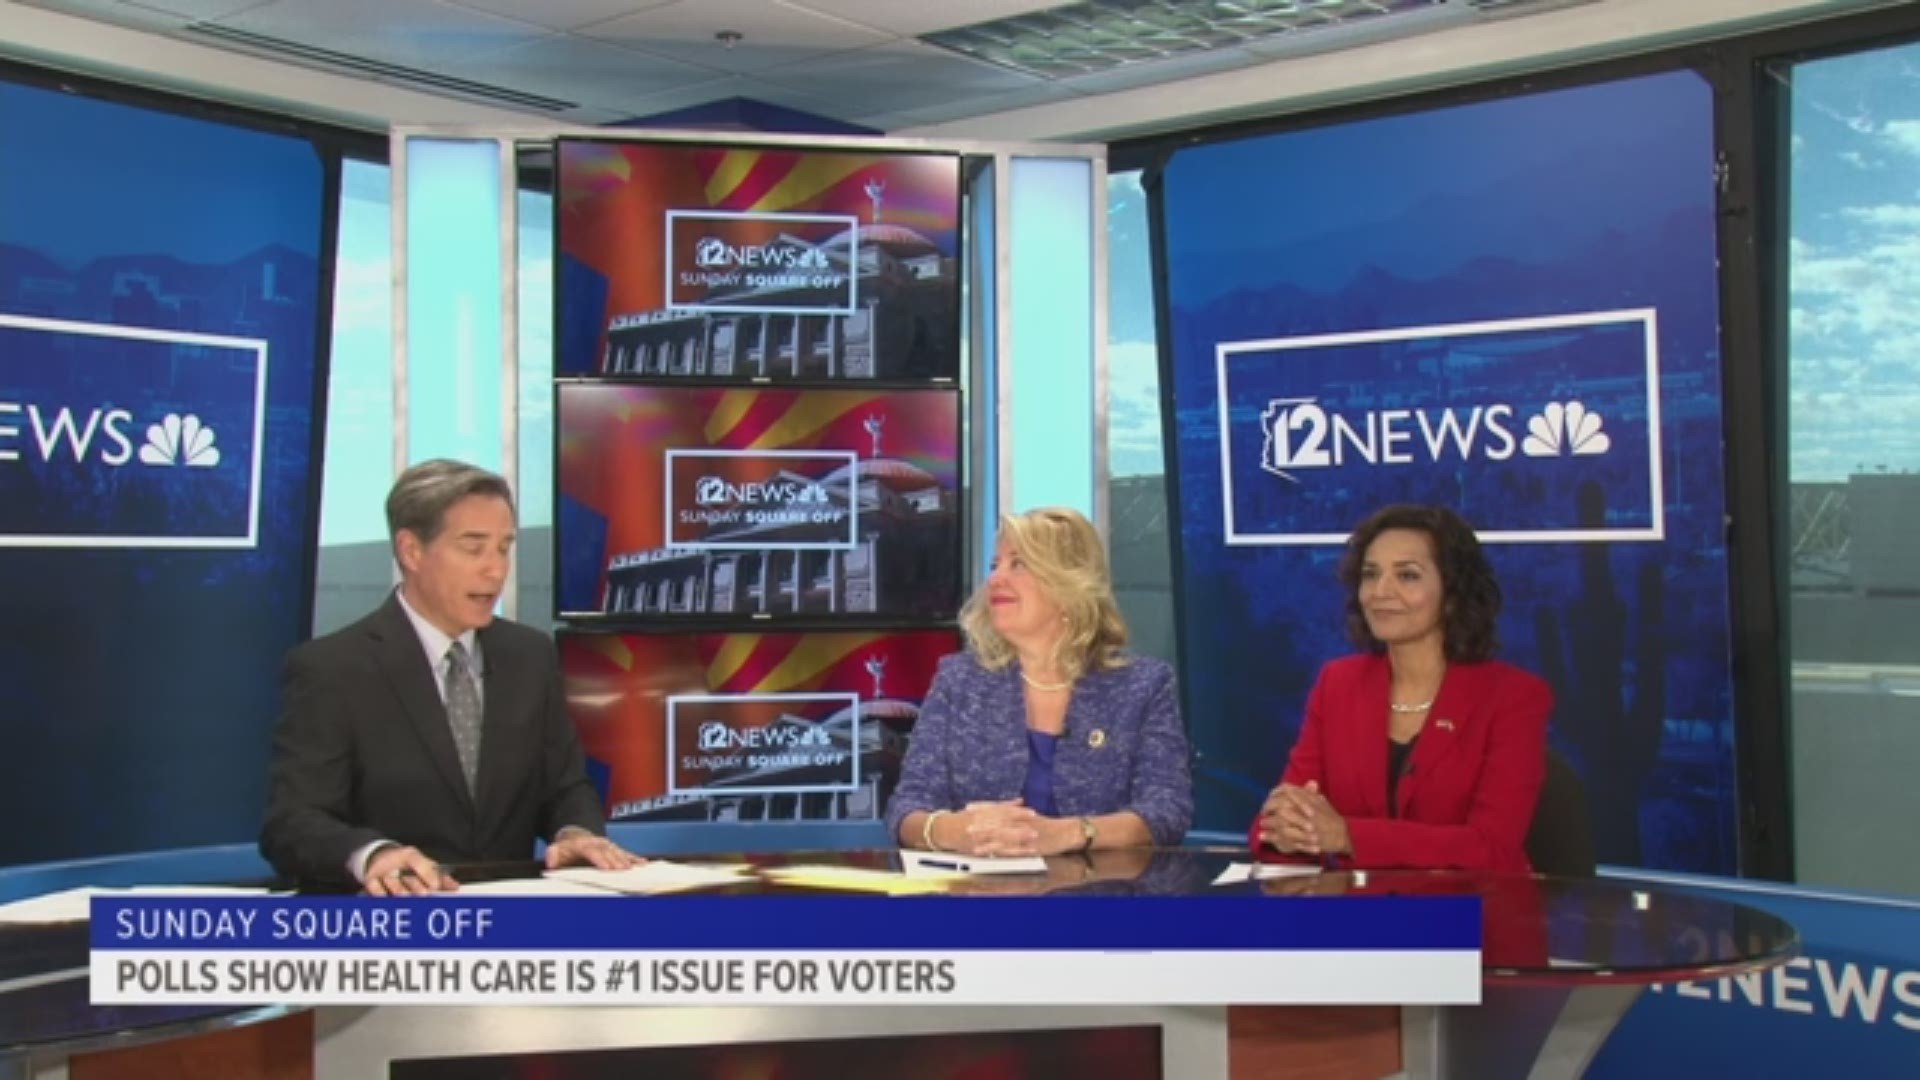 Republican Debbie Lesko and Democrat Hiral Tipirneni sharply disagree on health care and the recent tax cuts for Americans.